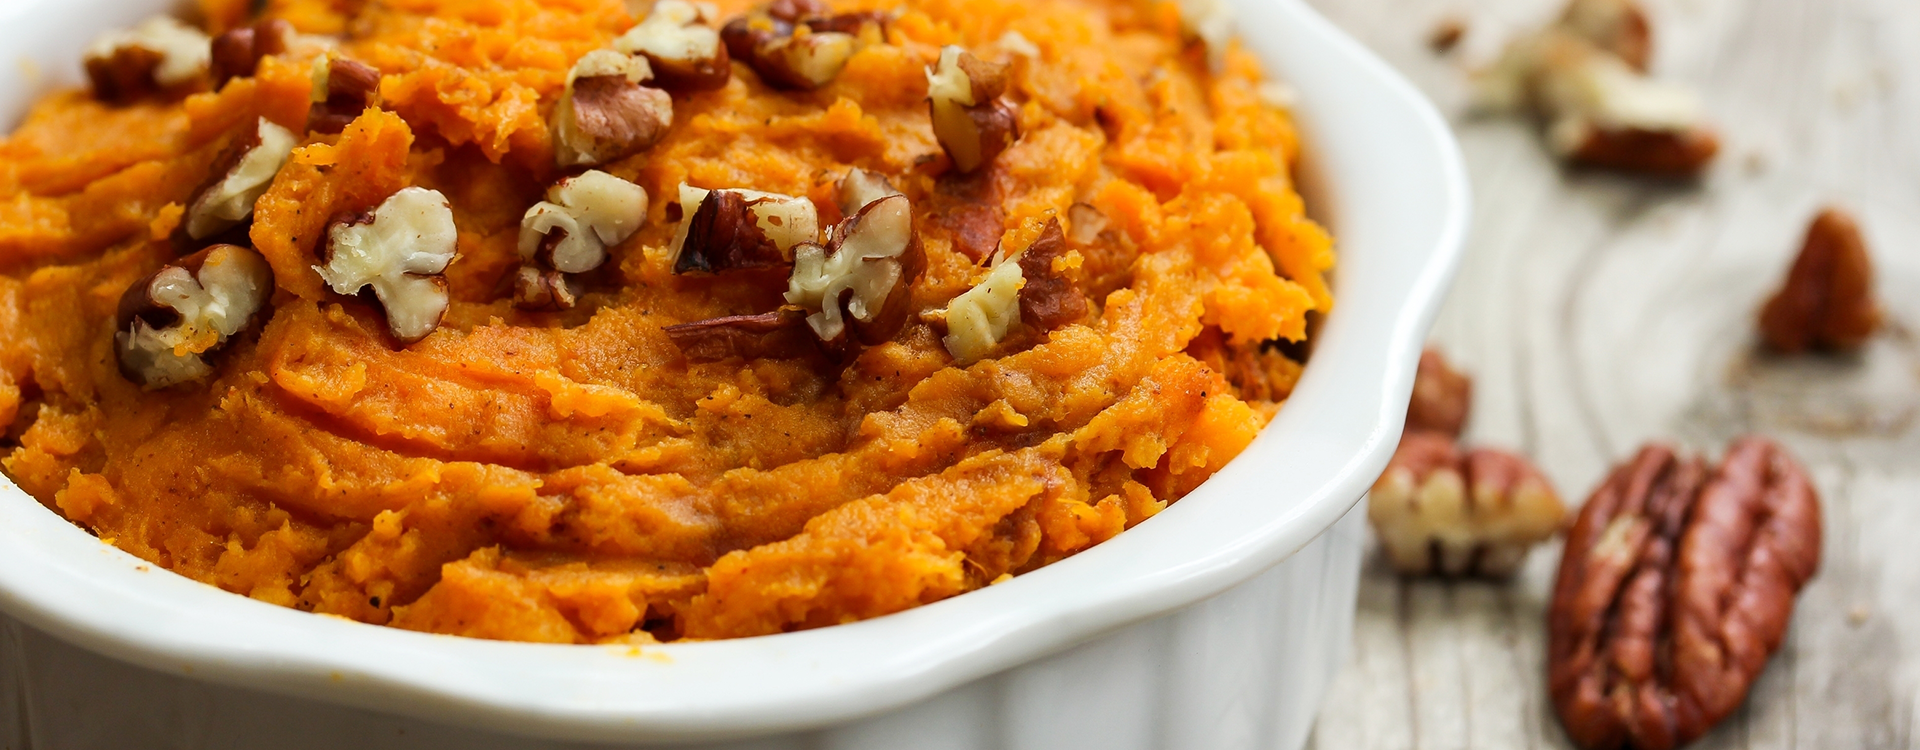 Whipped sweet potatoes with toasted pecans recipe for Thanksgiving to avoid GERD symptoms 